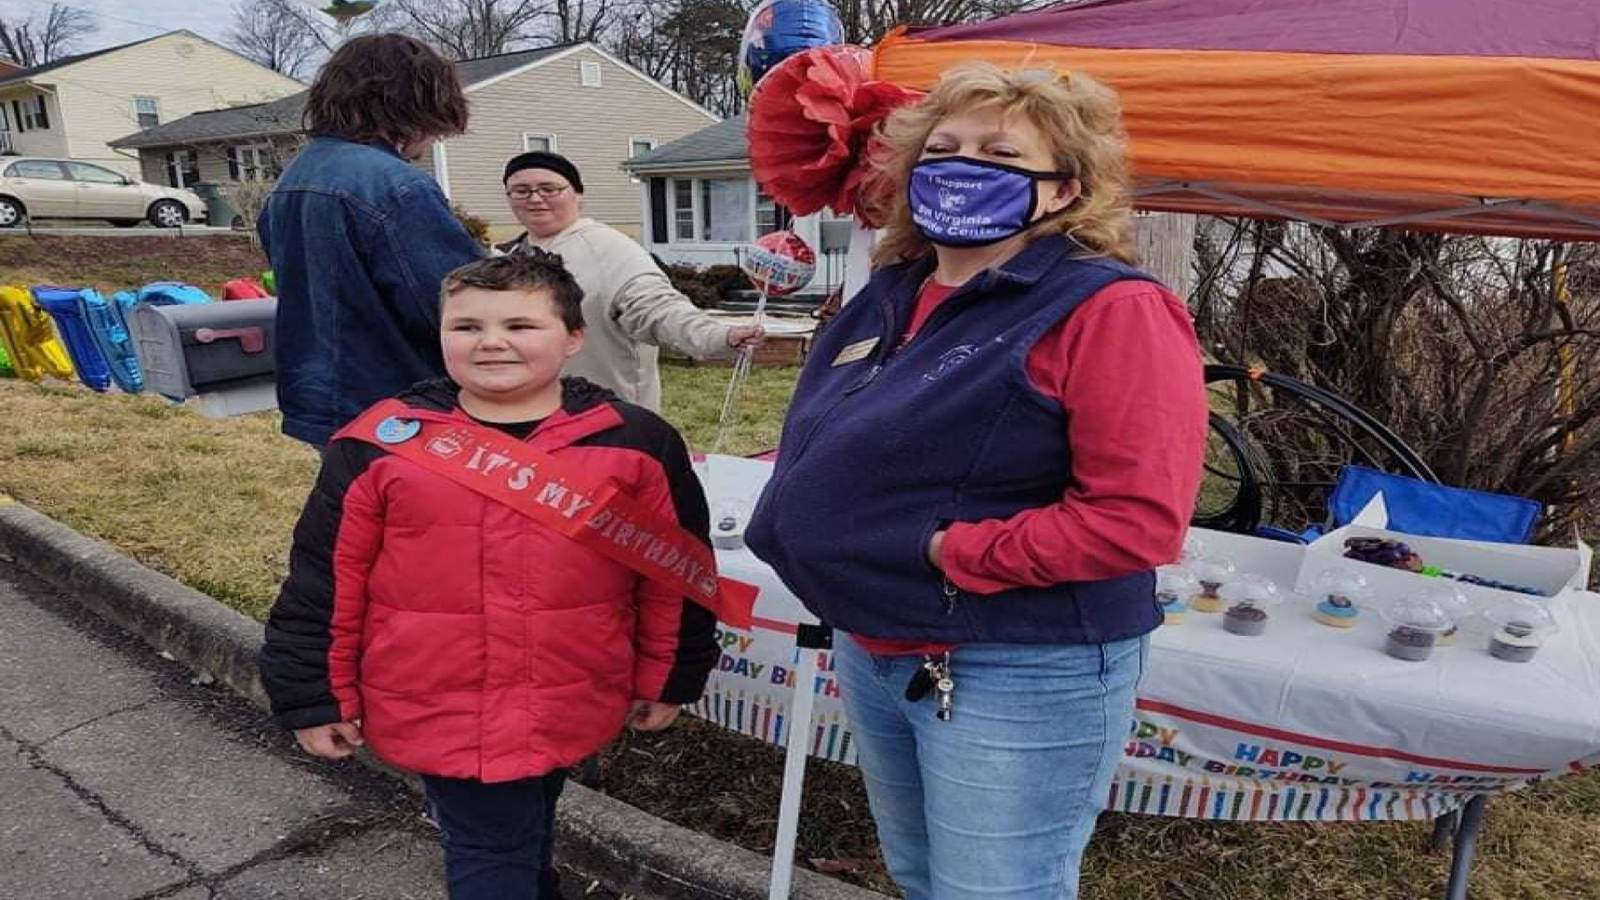 Local 10-year-old turns birthday parade into charity fundraiser